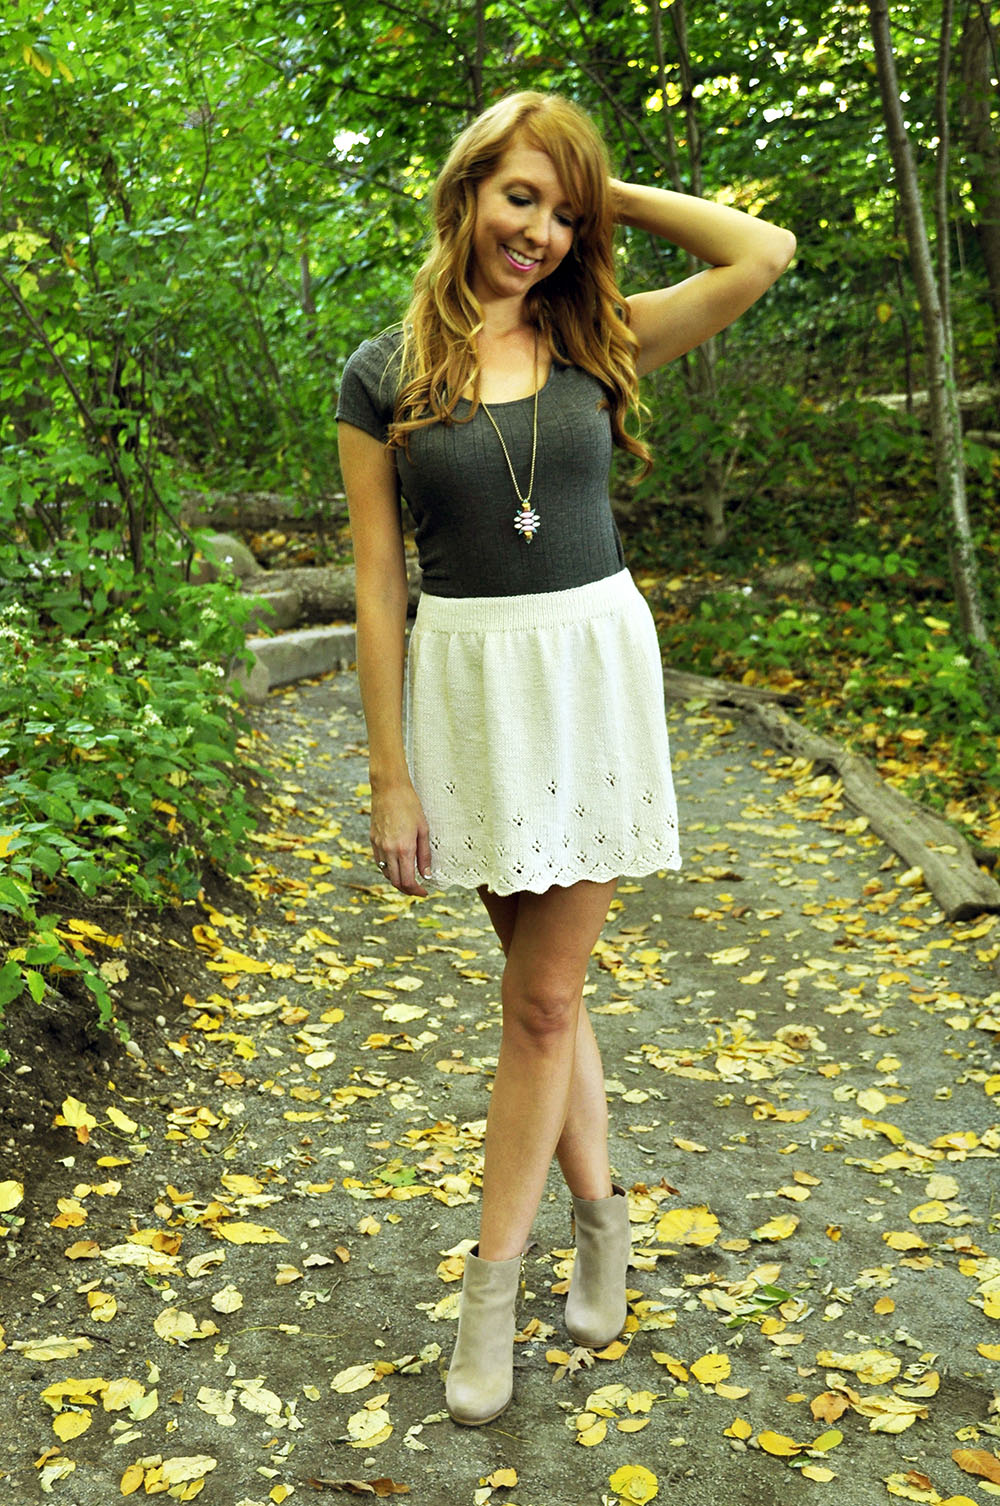 “Twirl of Your Dreams” Crop Top and Skater Skirt Set